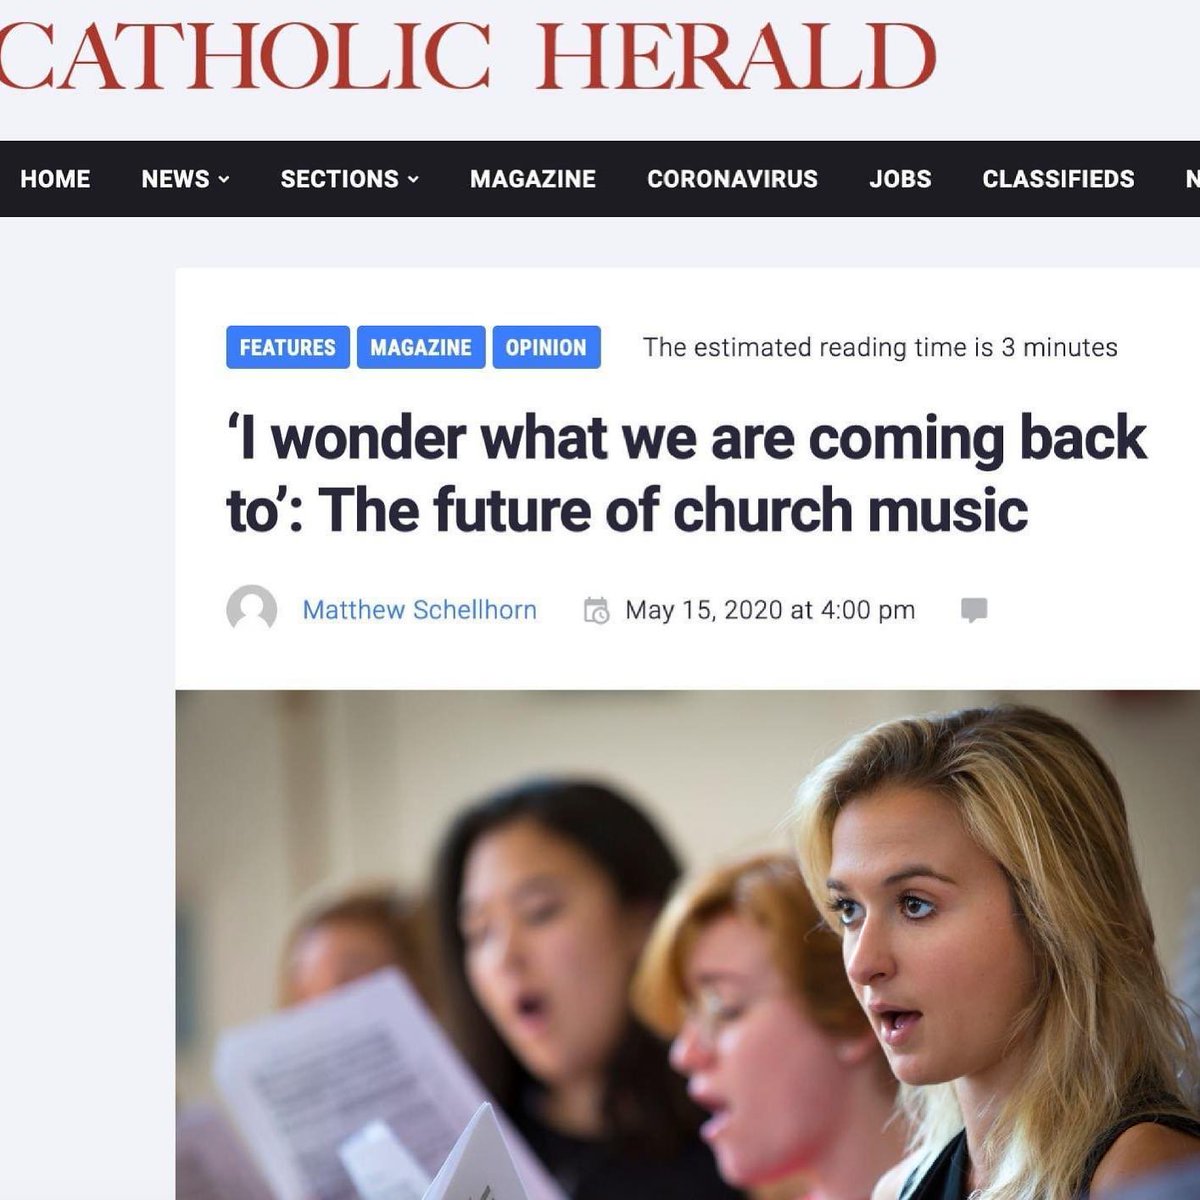 Two years ago today, @CatholicHerald published my article on the future of church music in the wake of the pandemic. You can read it here: matthewschellhorn.com/press/?post=si…